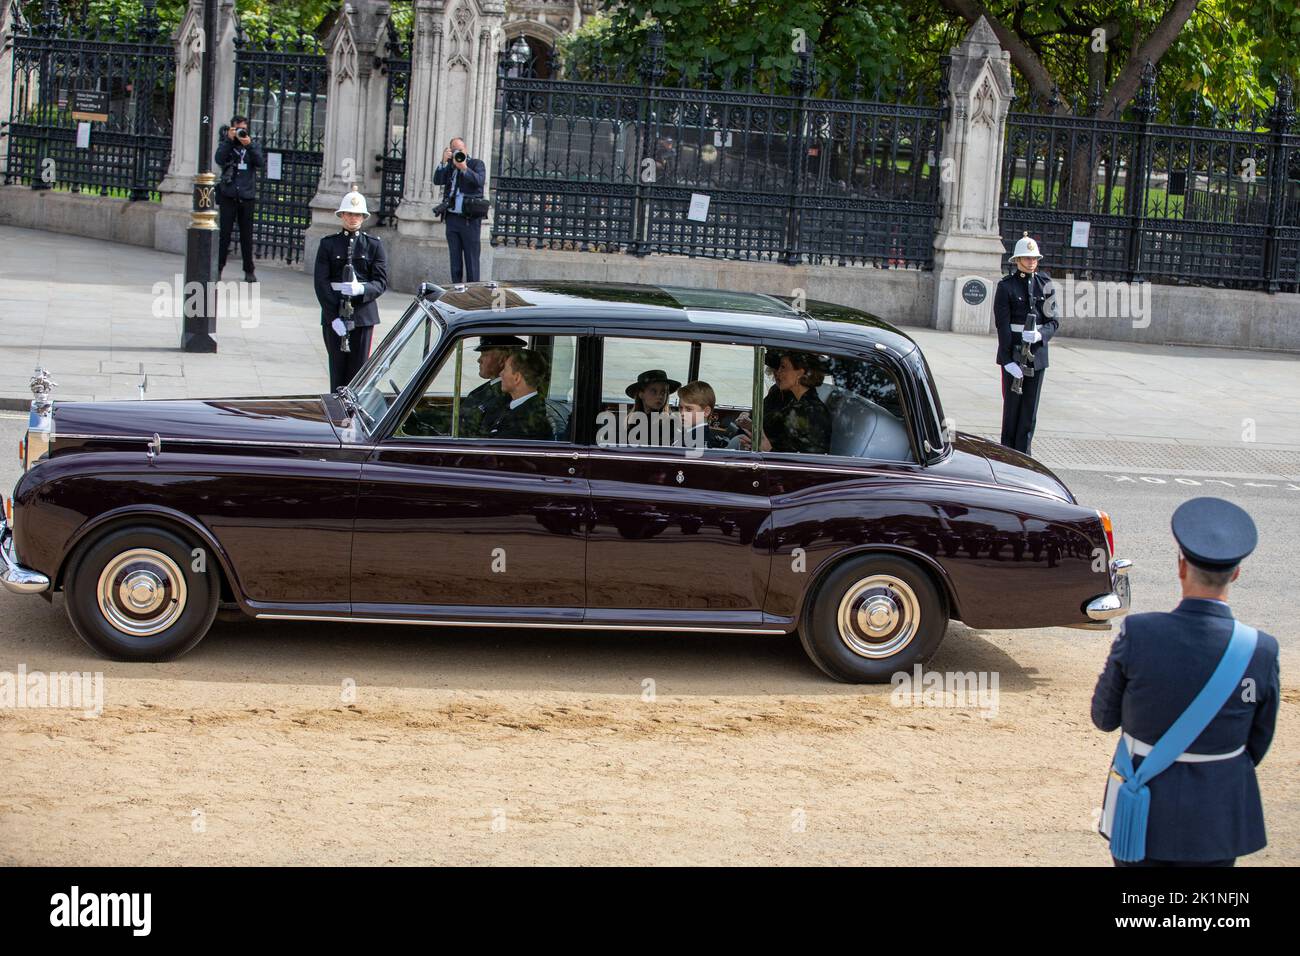 London, England. 19th September, 2022. The Princess of Wales, and her children Prince George and Princess Charlotte leave Westminster  Abbey following the service for the State Funeral of her Majesty Queen Elizabeth II. The funeral was one of the biggest events the country has ever seen. Credit: Kiki Streitberger / Alamy Live News Stock Photo